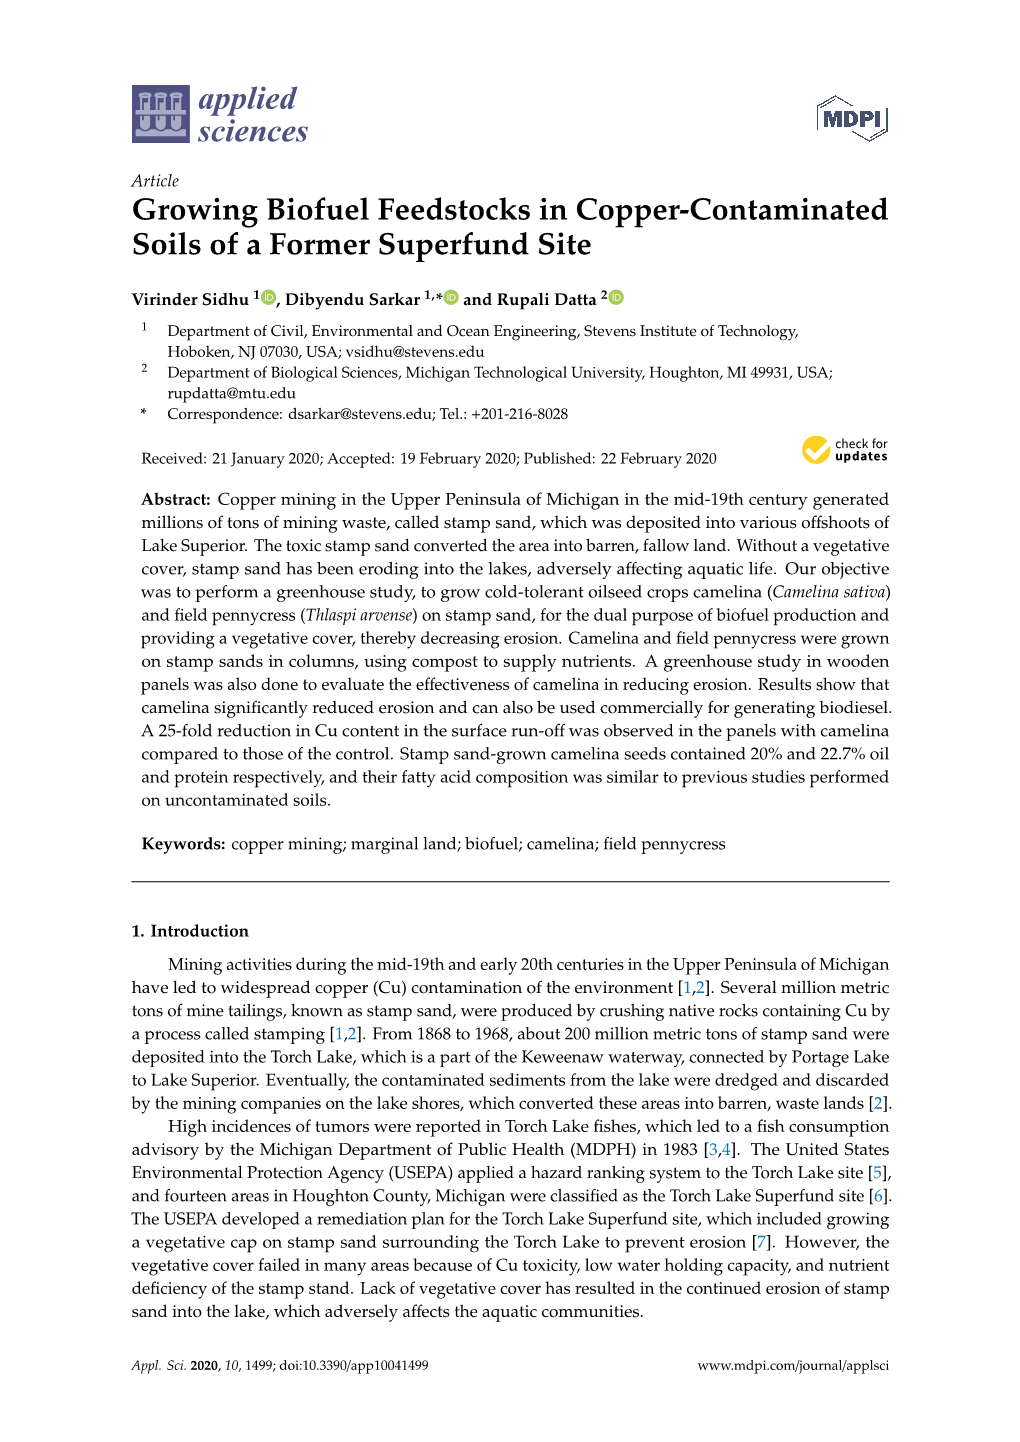 Growing Biofuel Feedstocks in Copper-Contaminated Soils of a Former Superfund Site